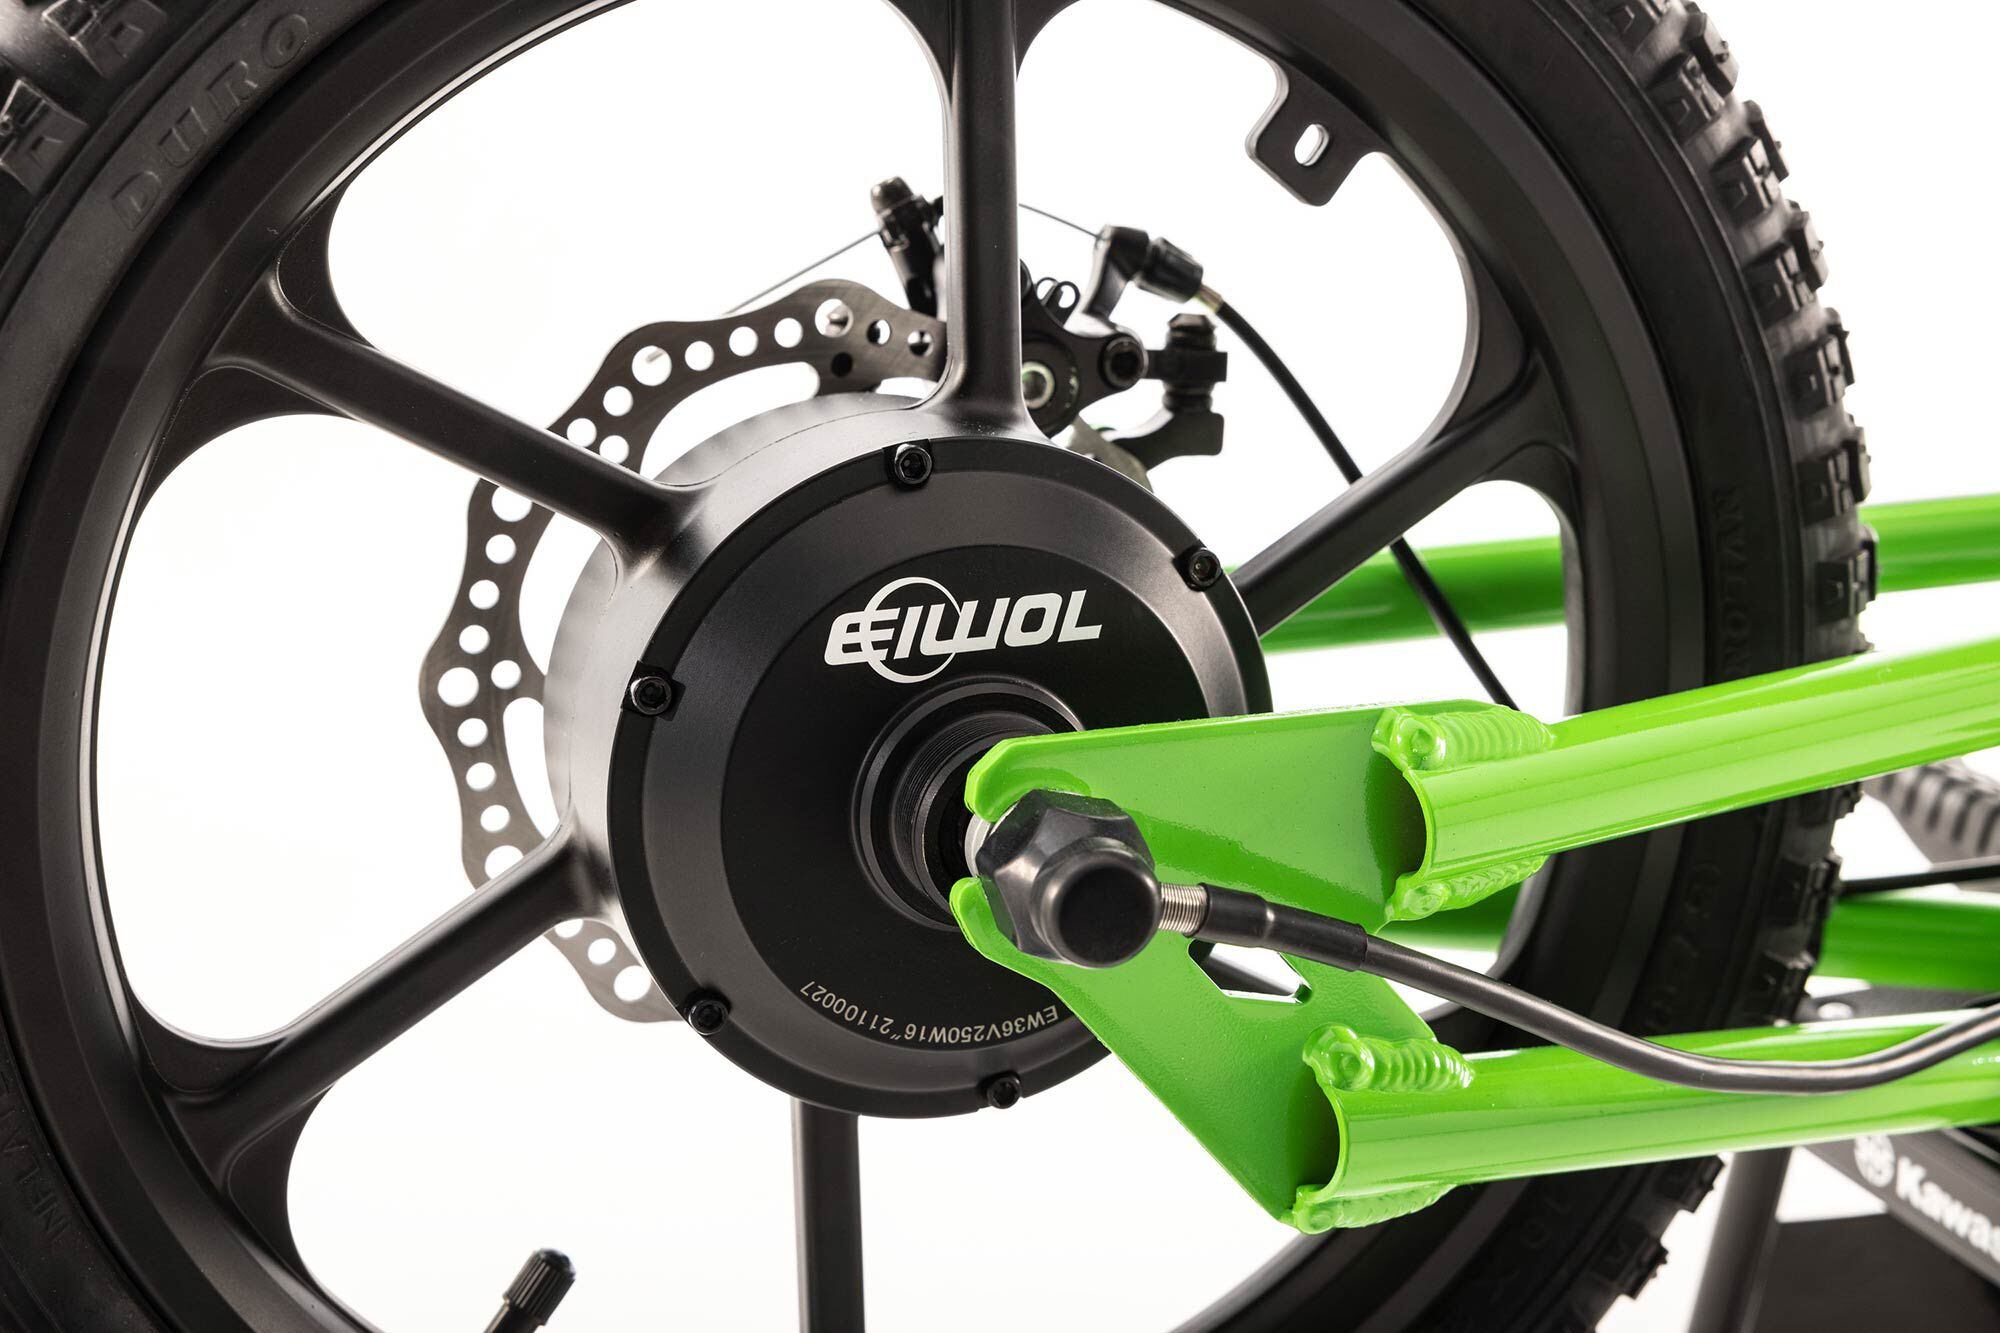 A 250-watt motor is hidden within the hub of the rear wheel. Little to no maintenance is required to keep it running.